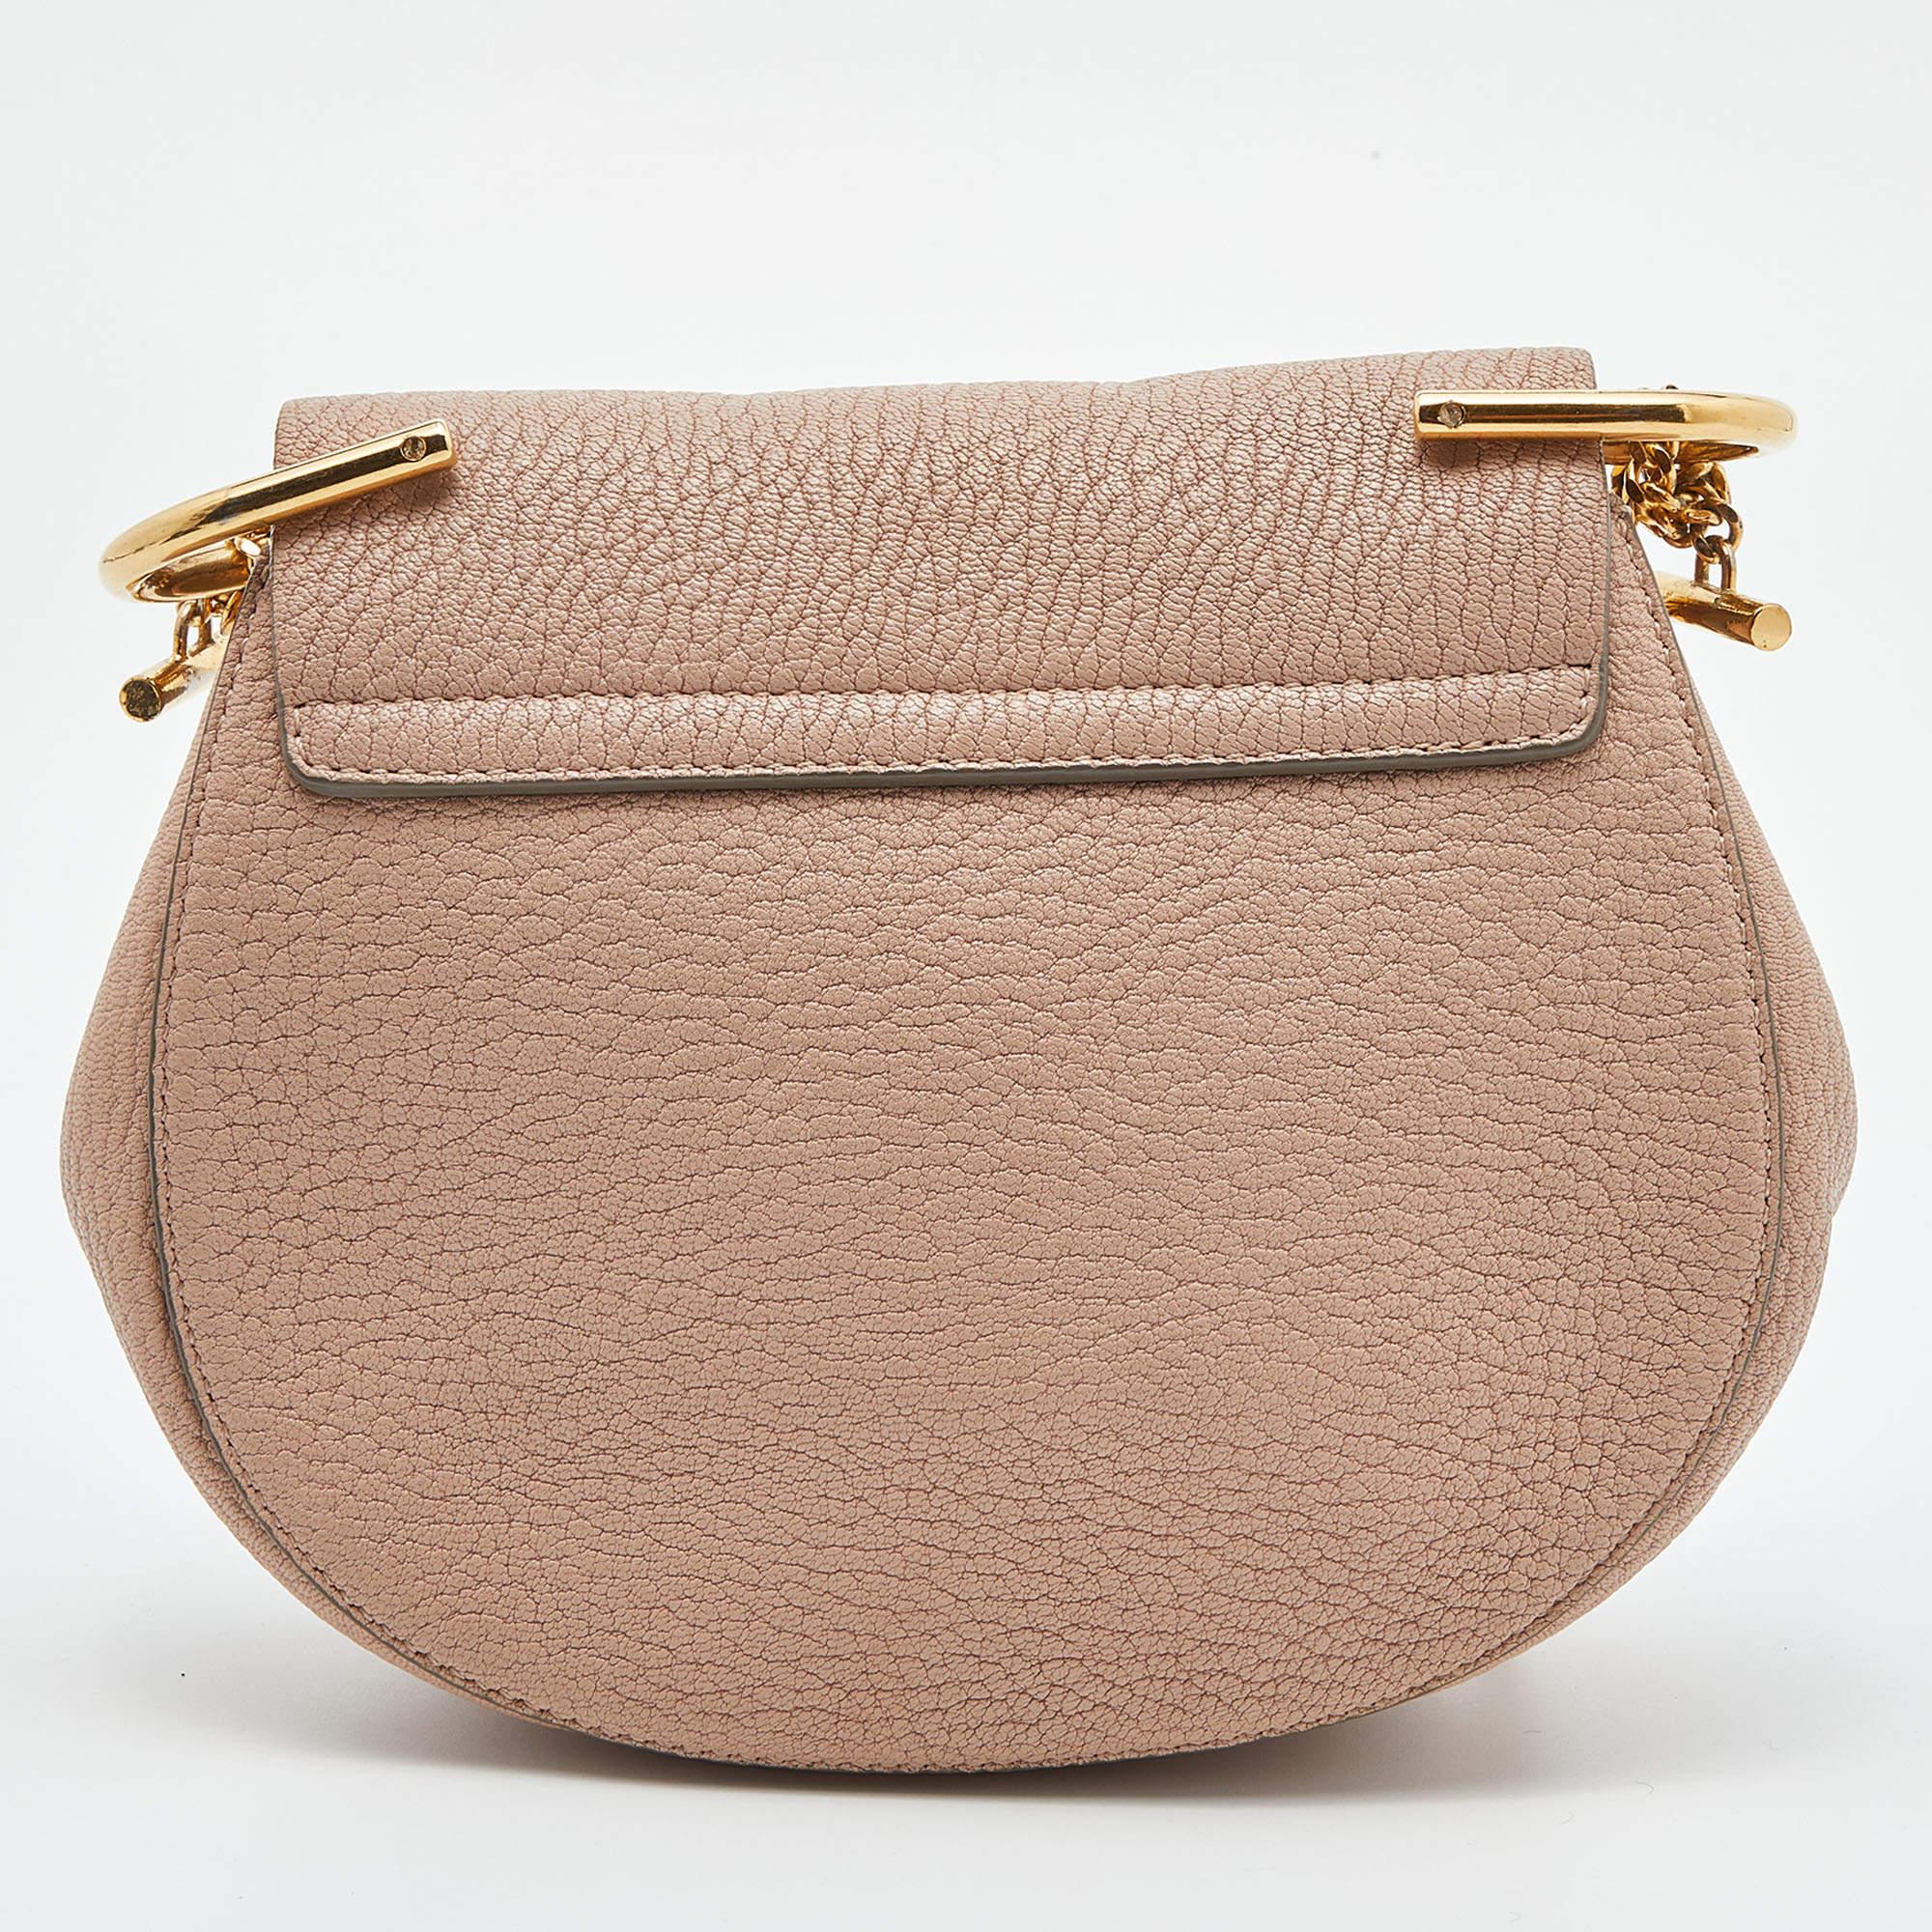 One of the most recognizable bags in the luxury world, Chloe's Drew bag is known for its distinct shape and minimal style detailing. This shoulder bag has been meticulously crafted from leather and designed with a pin lock closure and a shoulder